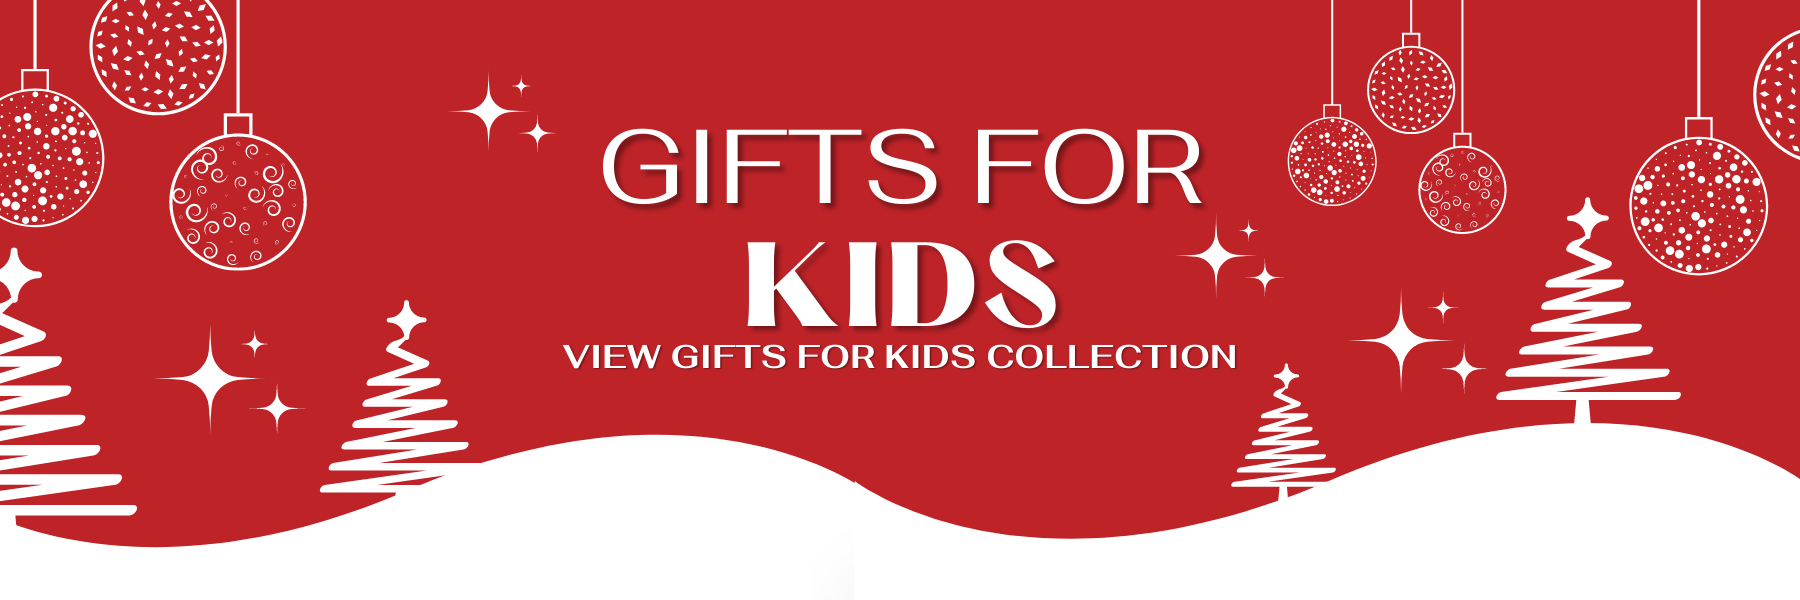 Hockey Gifts For Kids